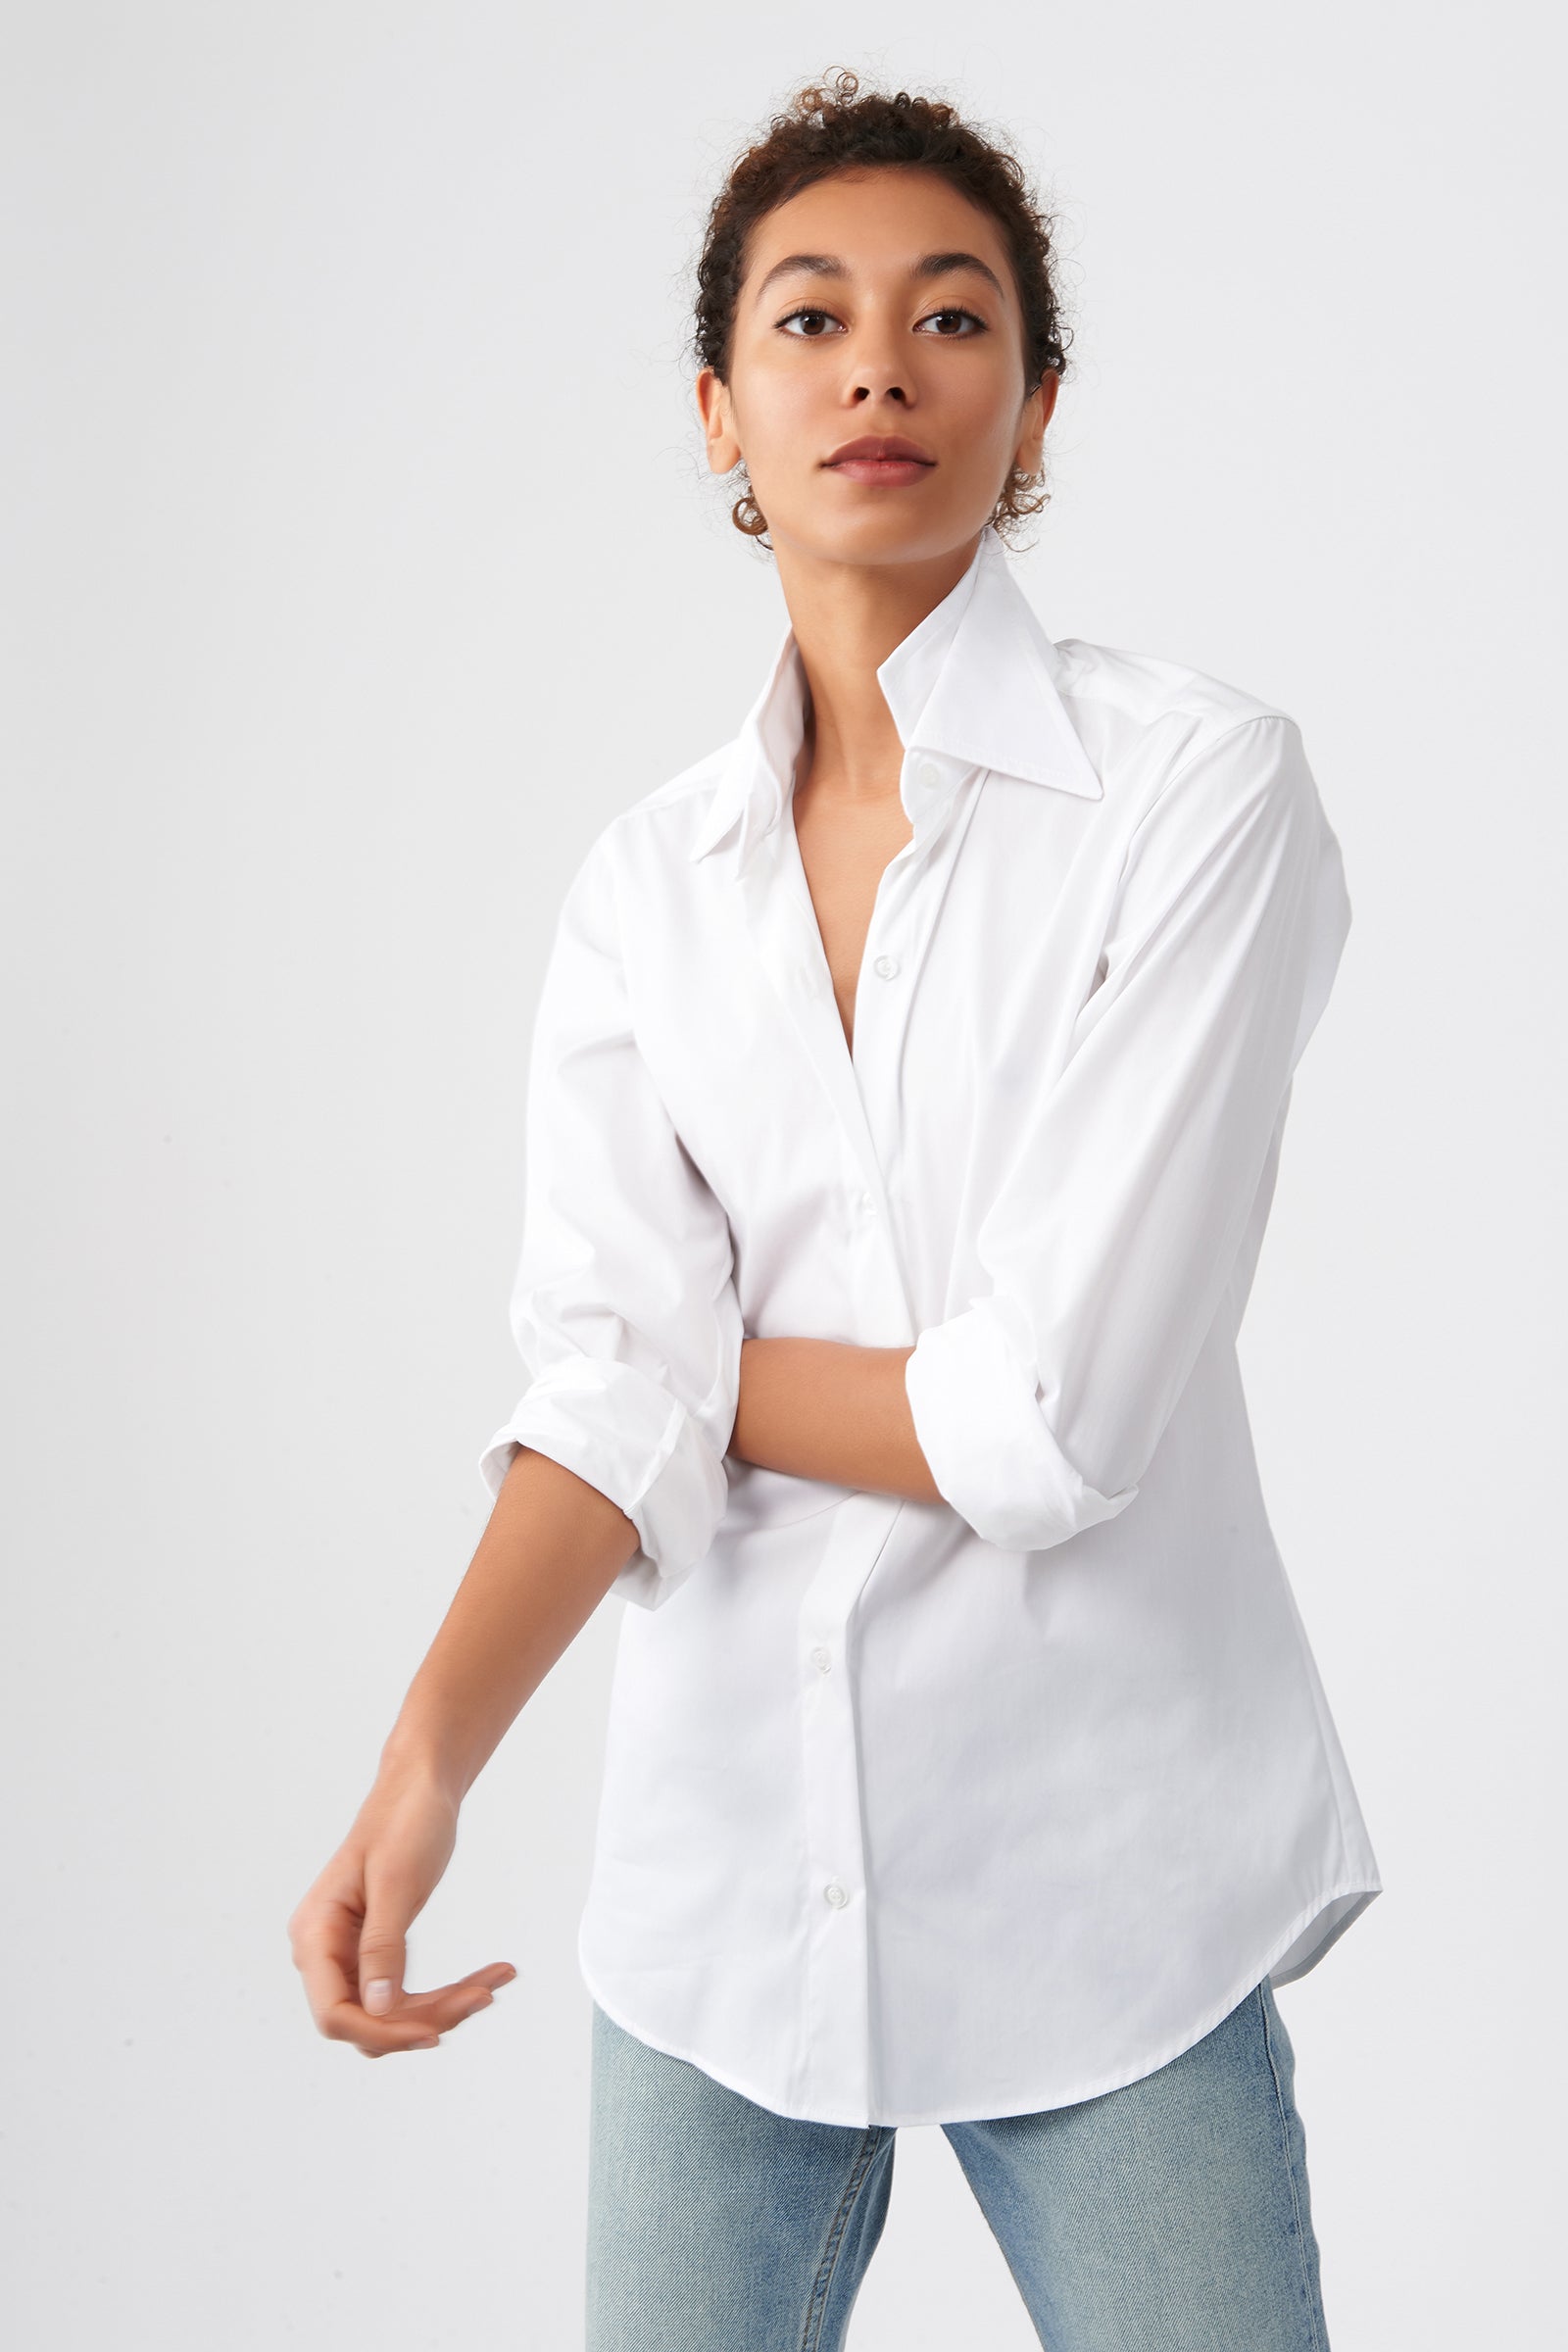 Kal Rieman Double Collar Shirt in White Cotton on Model Front View